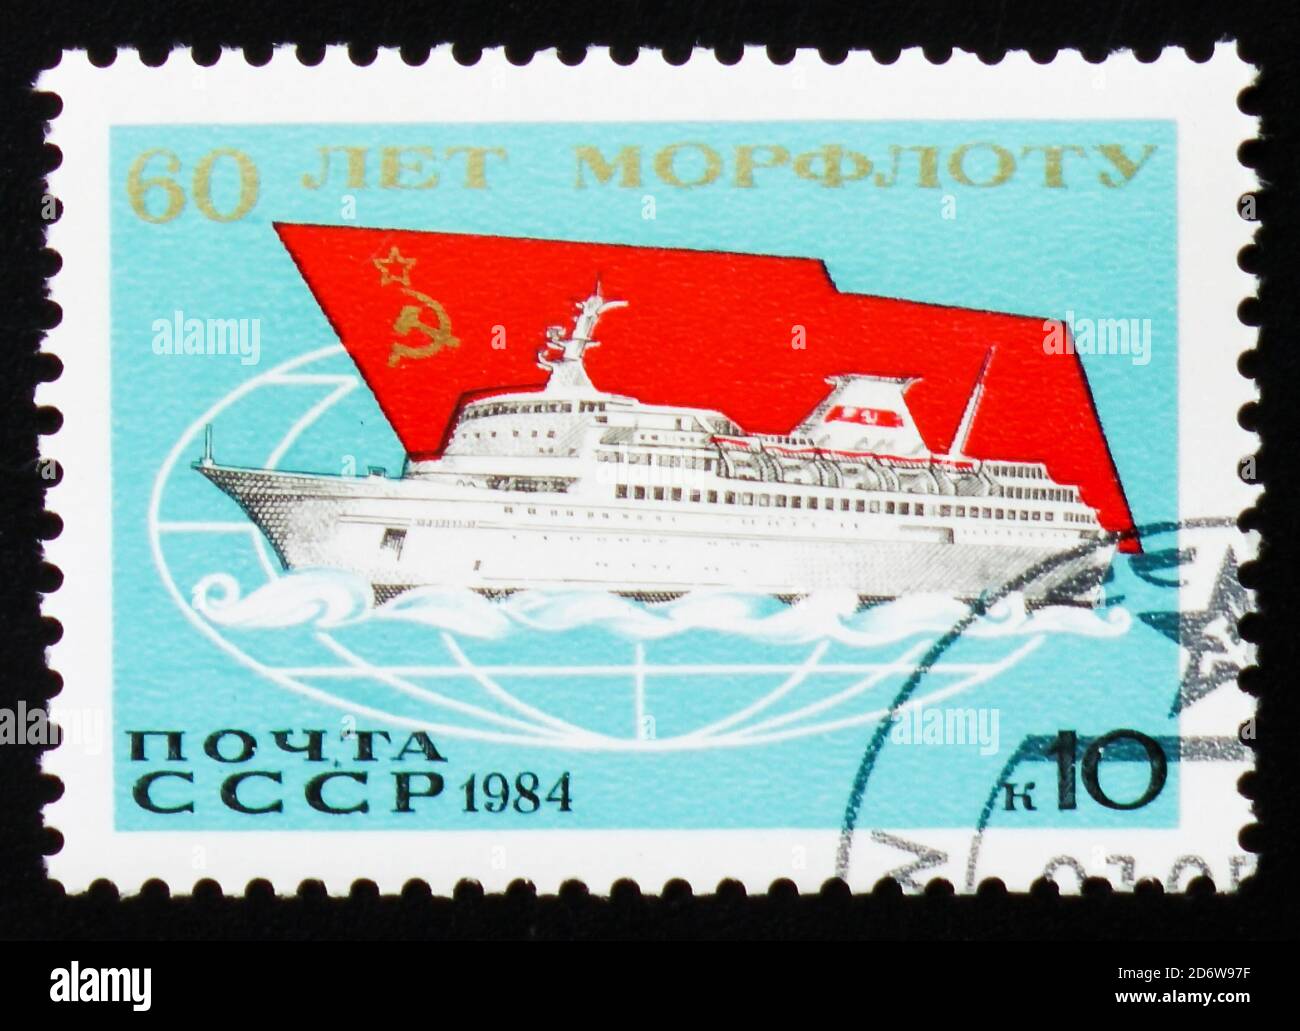 MOSCOW, RUSSIA - FEBRUARY 12, 2017: A stamp printed in USSR shows Morflot, Merchant and Transport Fleet, 60th anniversary, circa 1984 Stock Photo